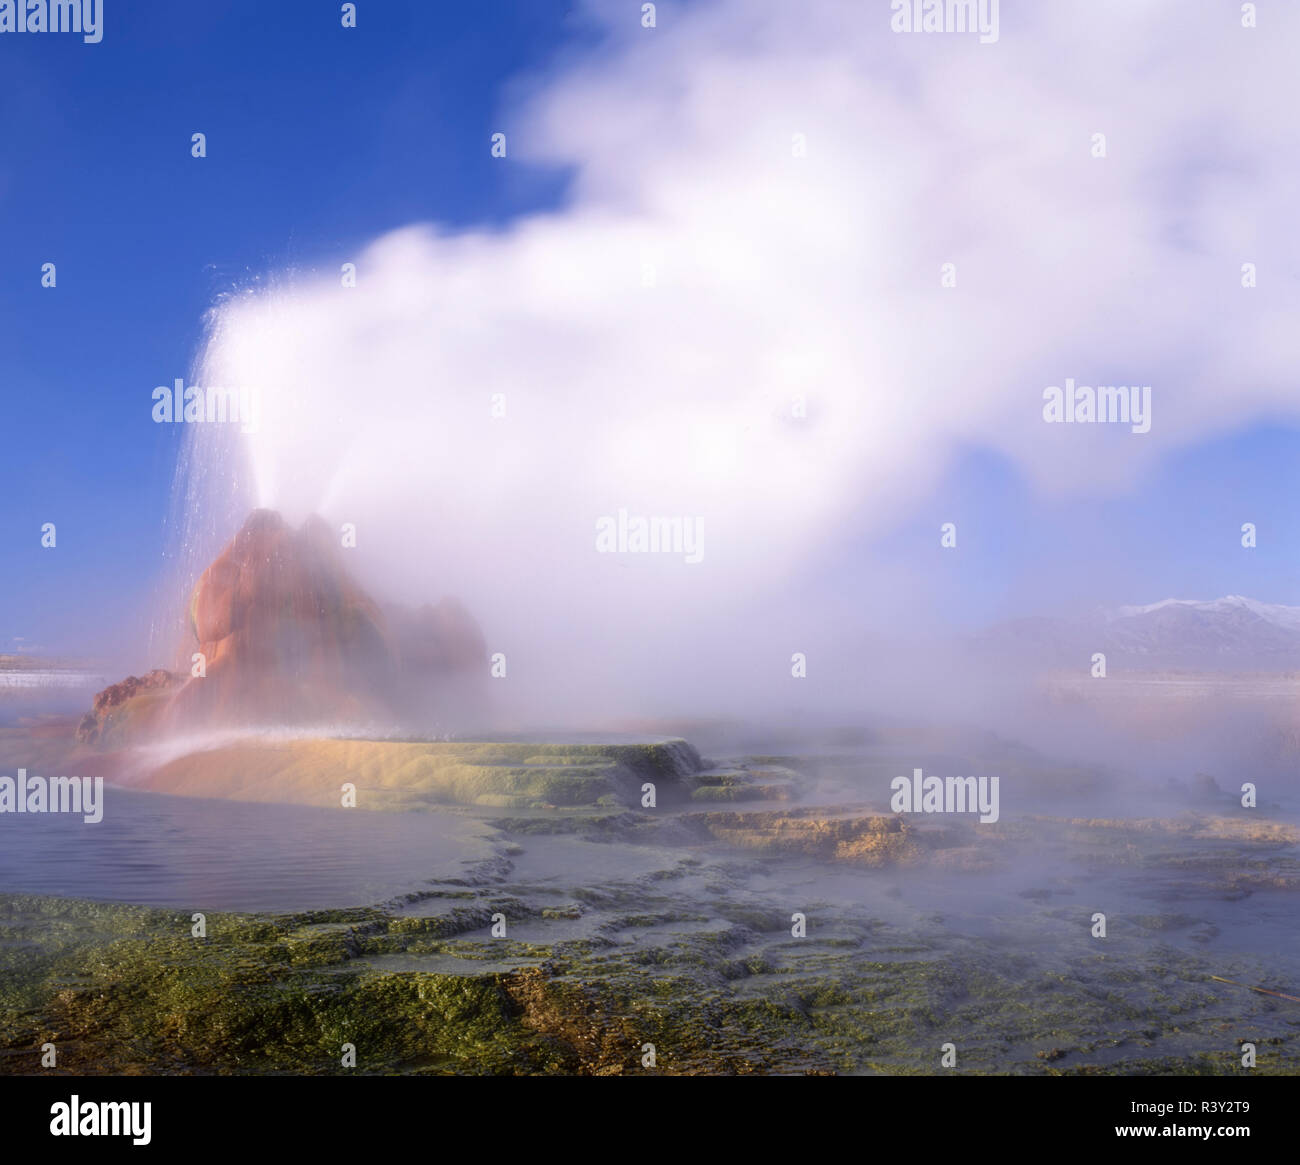 USA, Nevada, Geyser Hot Springs. Travertine cones and terraces of geysers. Stock Photo